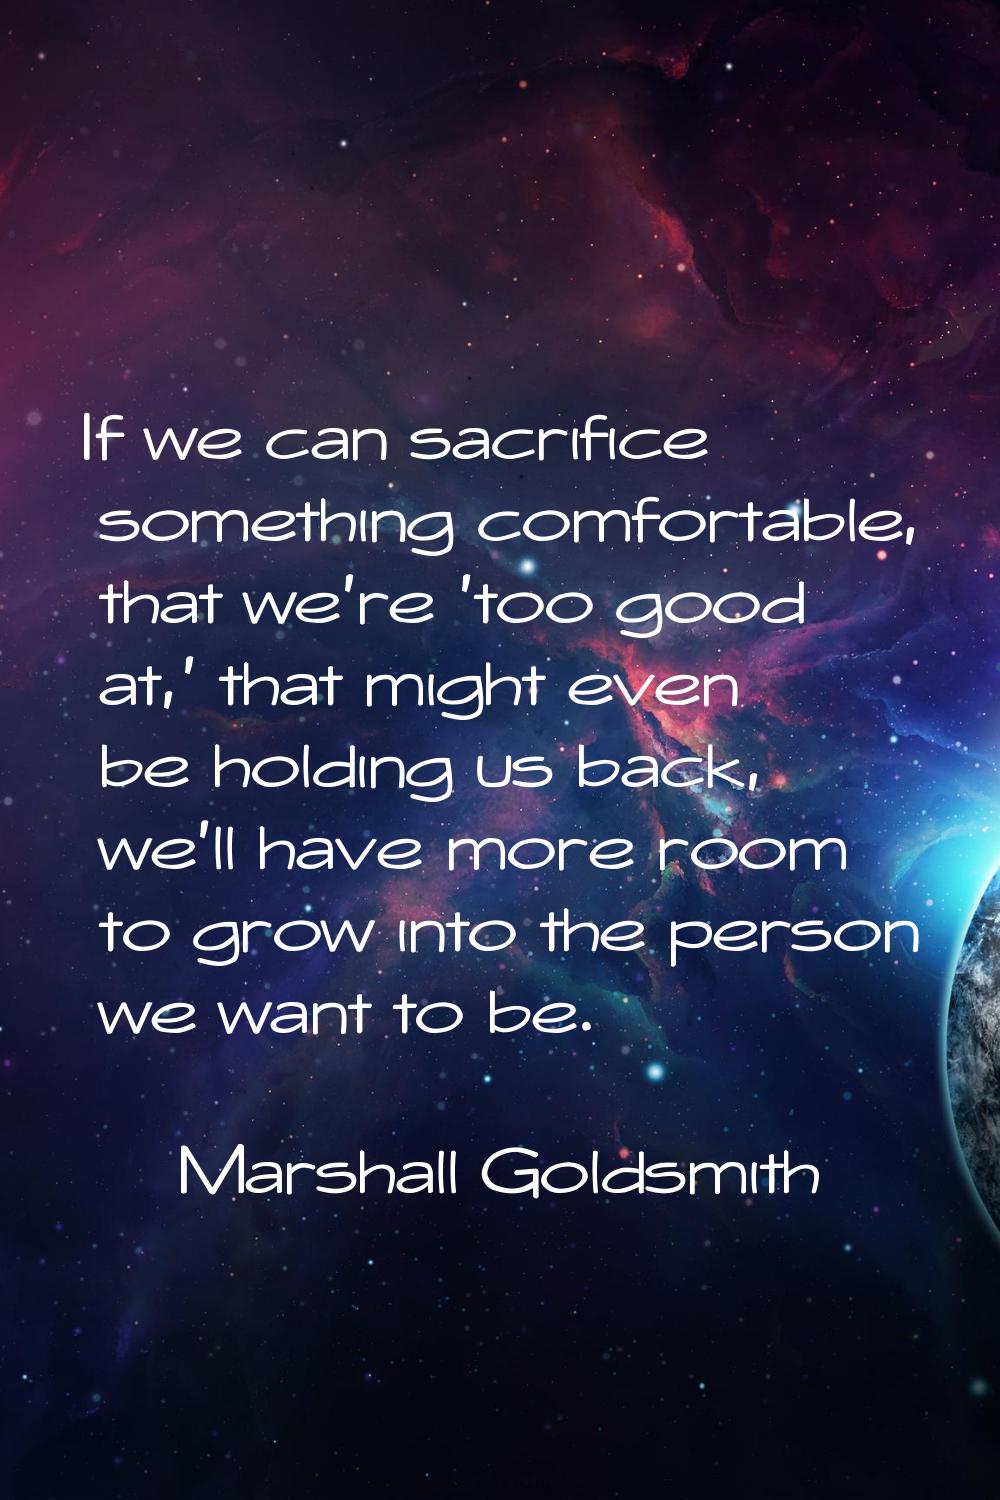 If we can sacrifice something comfortable, that we're 'too good at,' that might even be holding us 